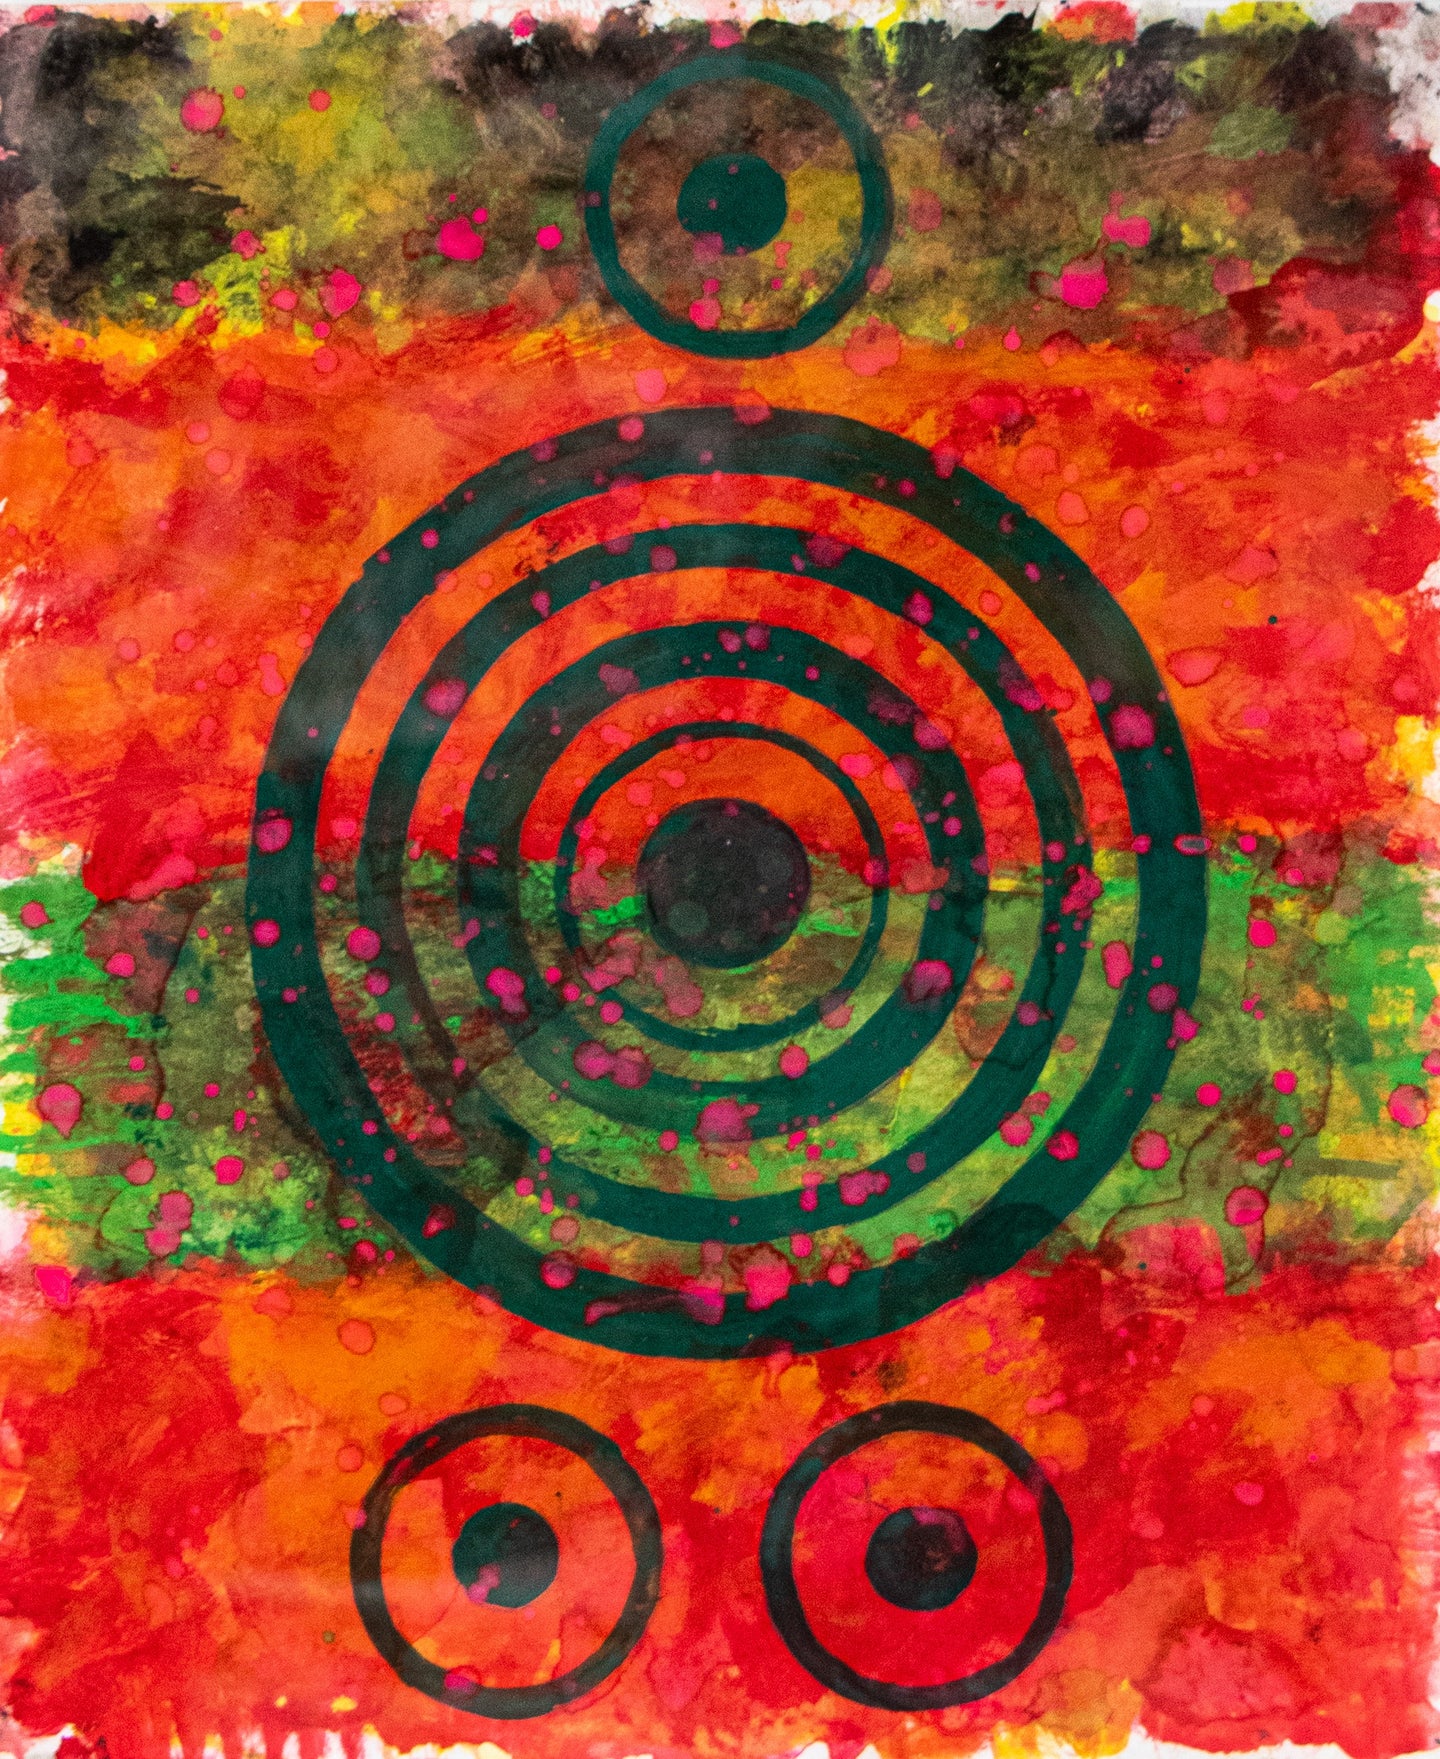 J. Steven Manolis, REDWORLD Concentric, 2016.01, 17 x14 inch, Watercolor, Goauche & Acrylic on Arches Paper, Red Abstract Painting, Red Abstract wall art for sale at Manolis Projects Art Gallery, Miami, Fl